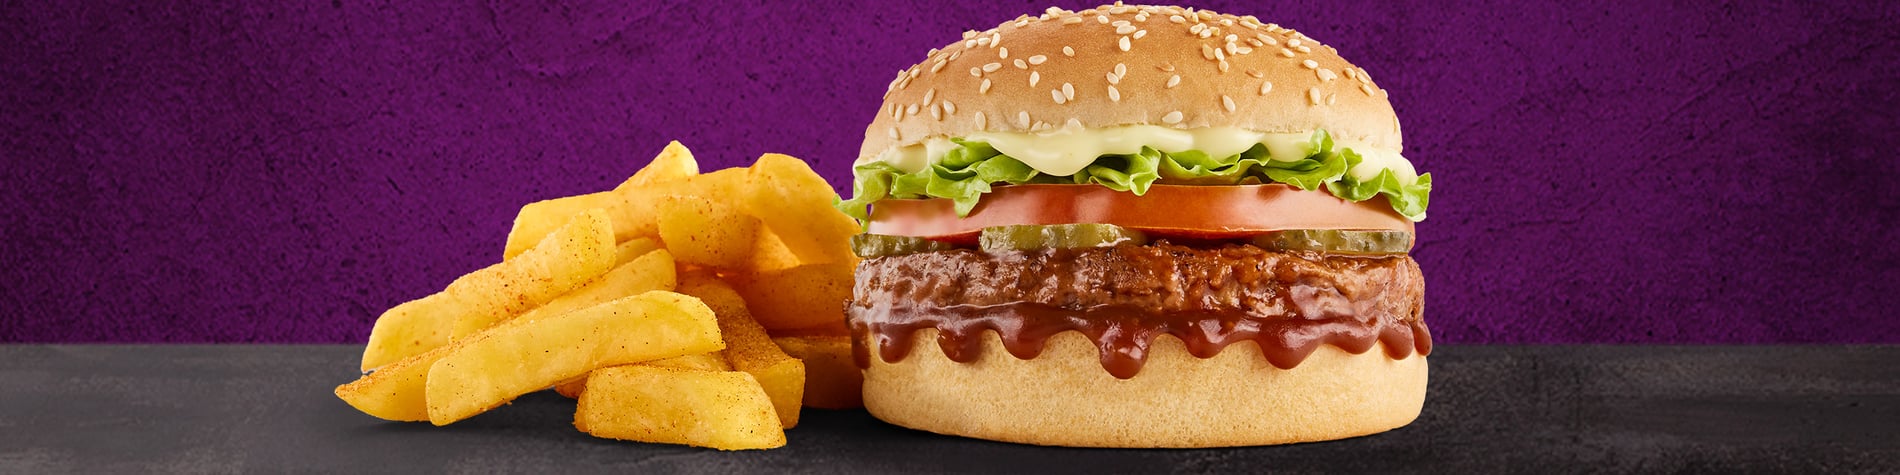 The NEW Mo’MjojoTM Burger Meal from Steers® Bloemfontein Showgate DT. 2 Flame-Grilled pure beef patties, pineapple, macon, tomato, lettuce, and small Famous Hand-Cut Chips, on a purple background.